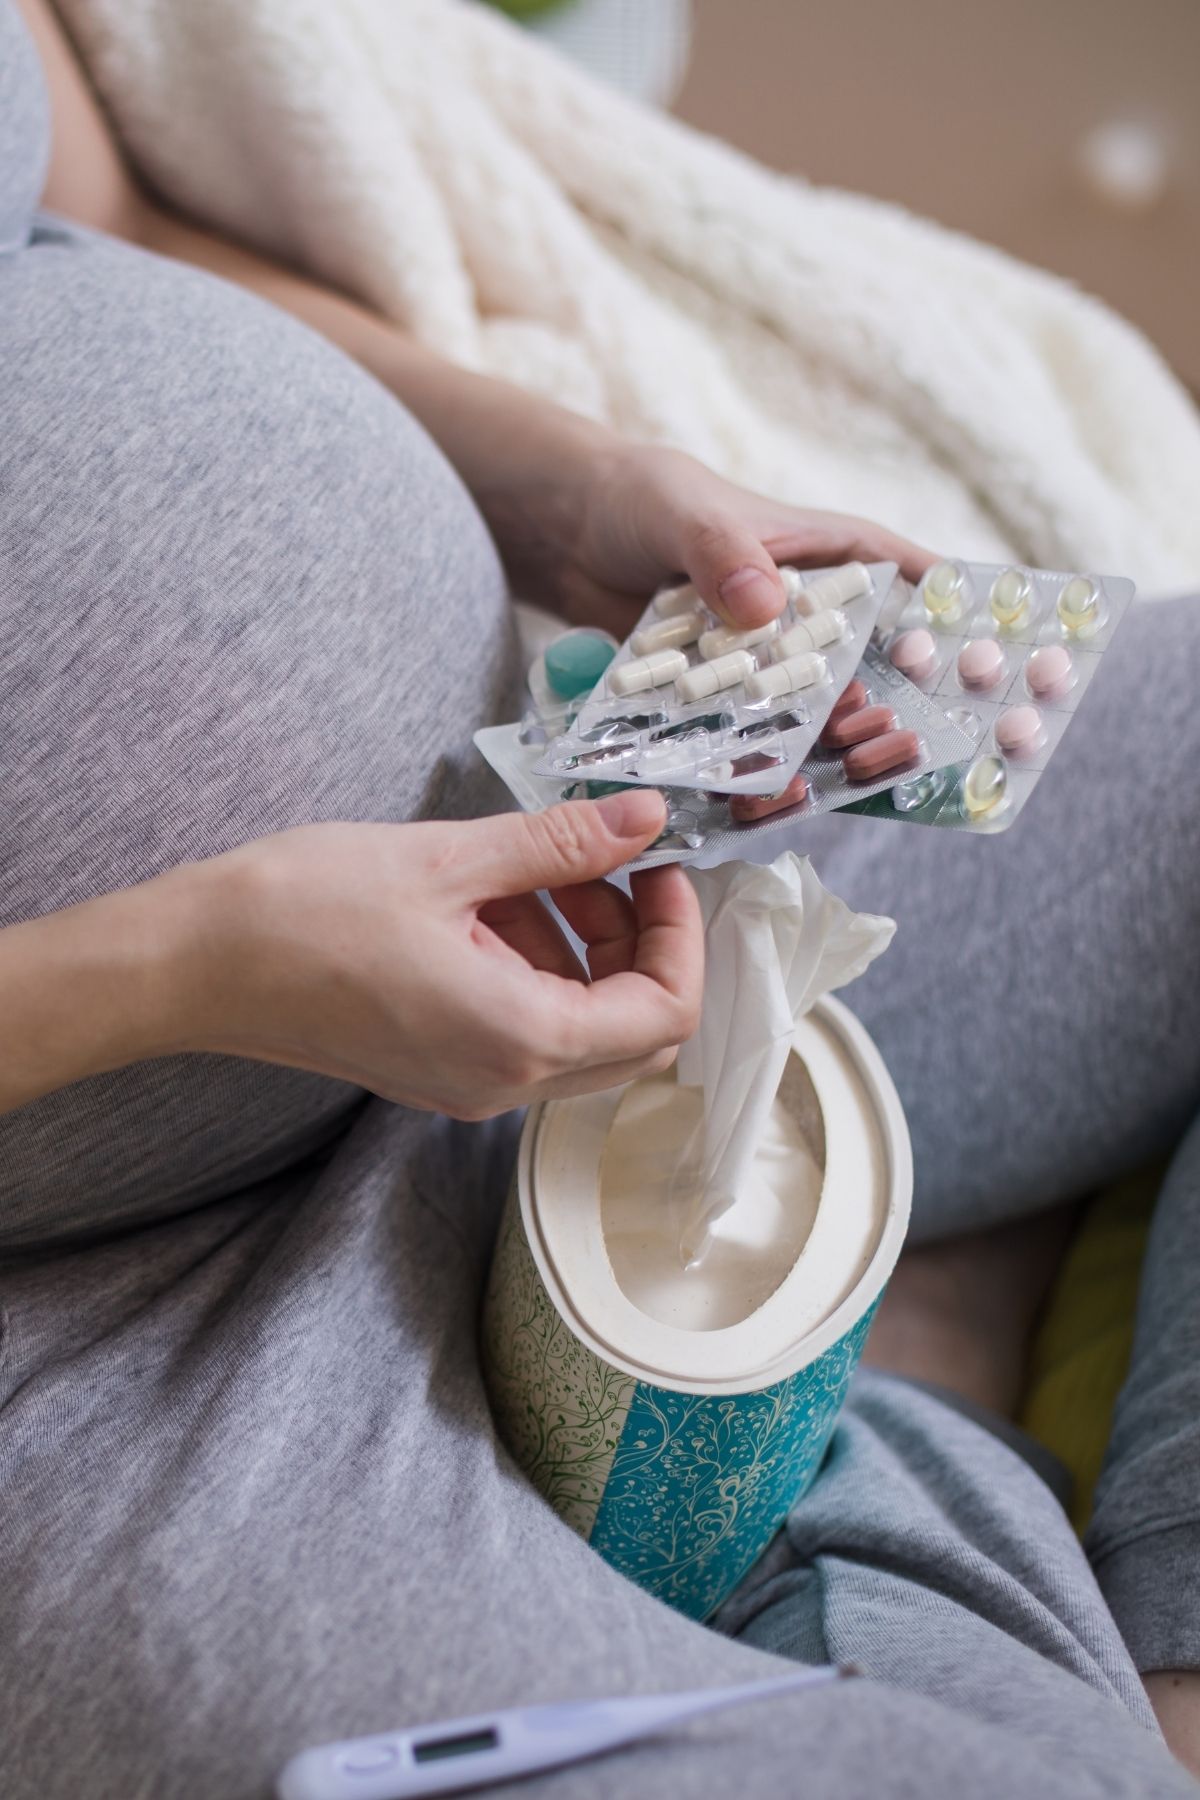 Pregnant woman holds several opened medication blister sheets while sitting cross-legged with a box of tissues.